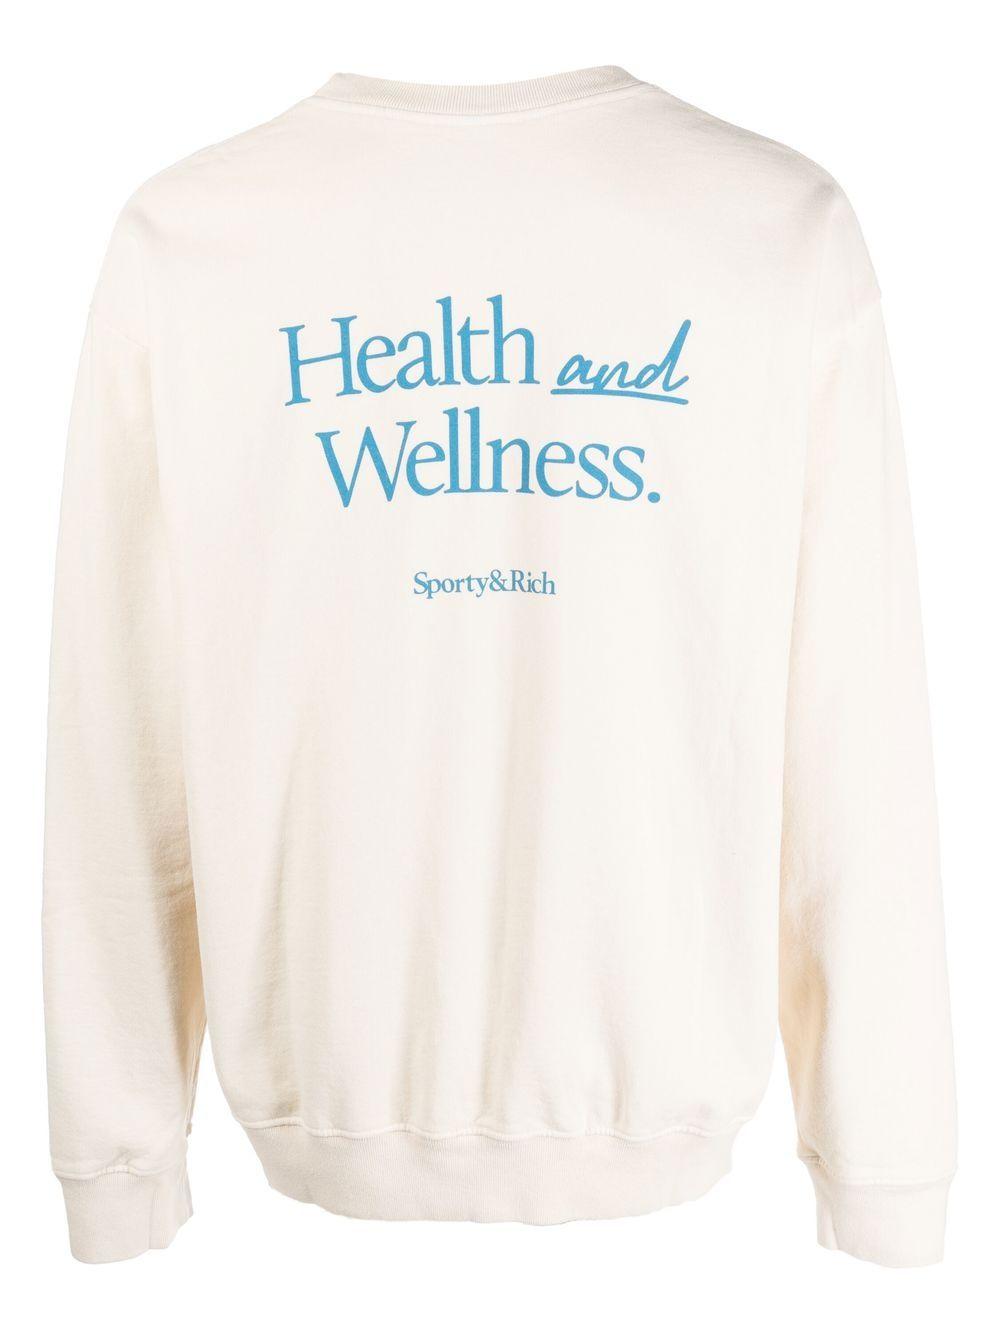 Sporty & Rich New Health Crewneck Cream In Cotton in Natural | Lyst